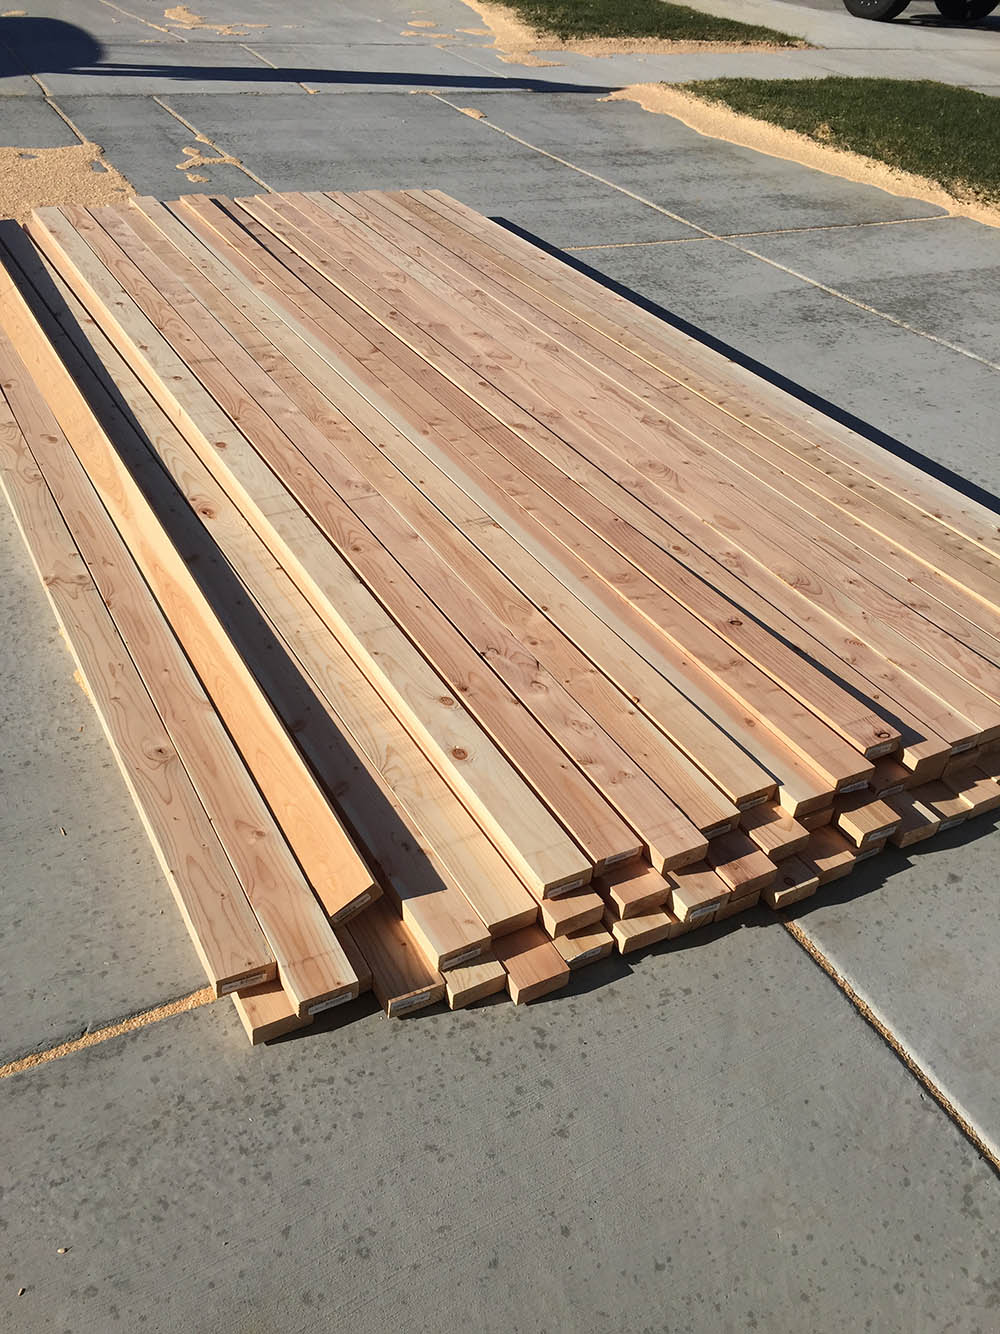 How To Build A Simple Diy Deck On Budget